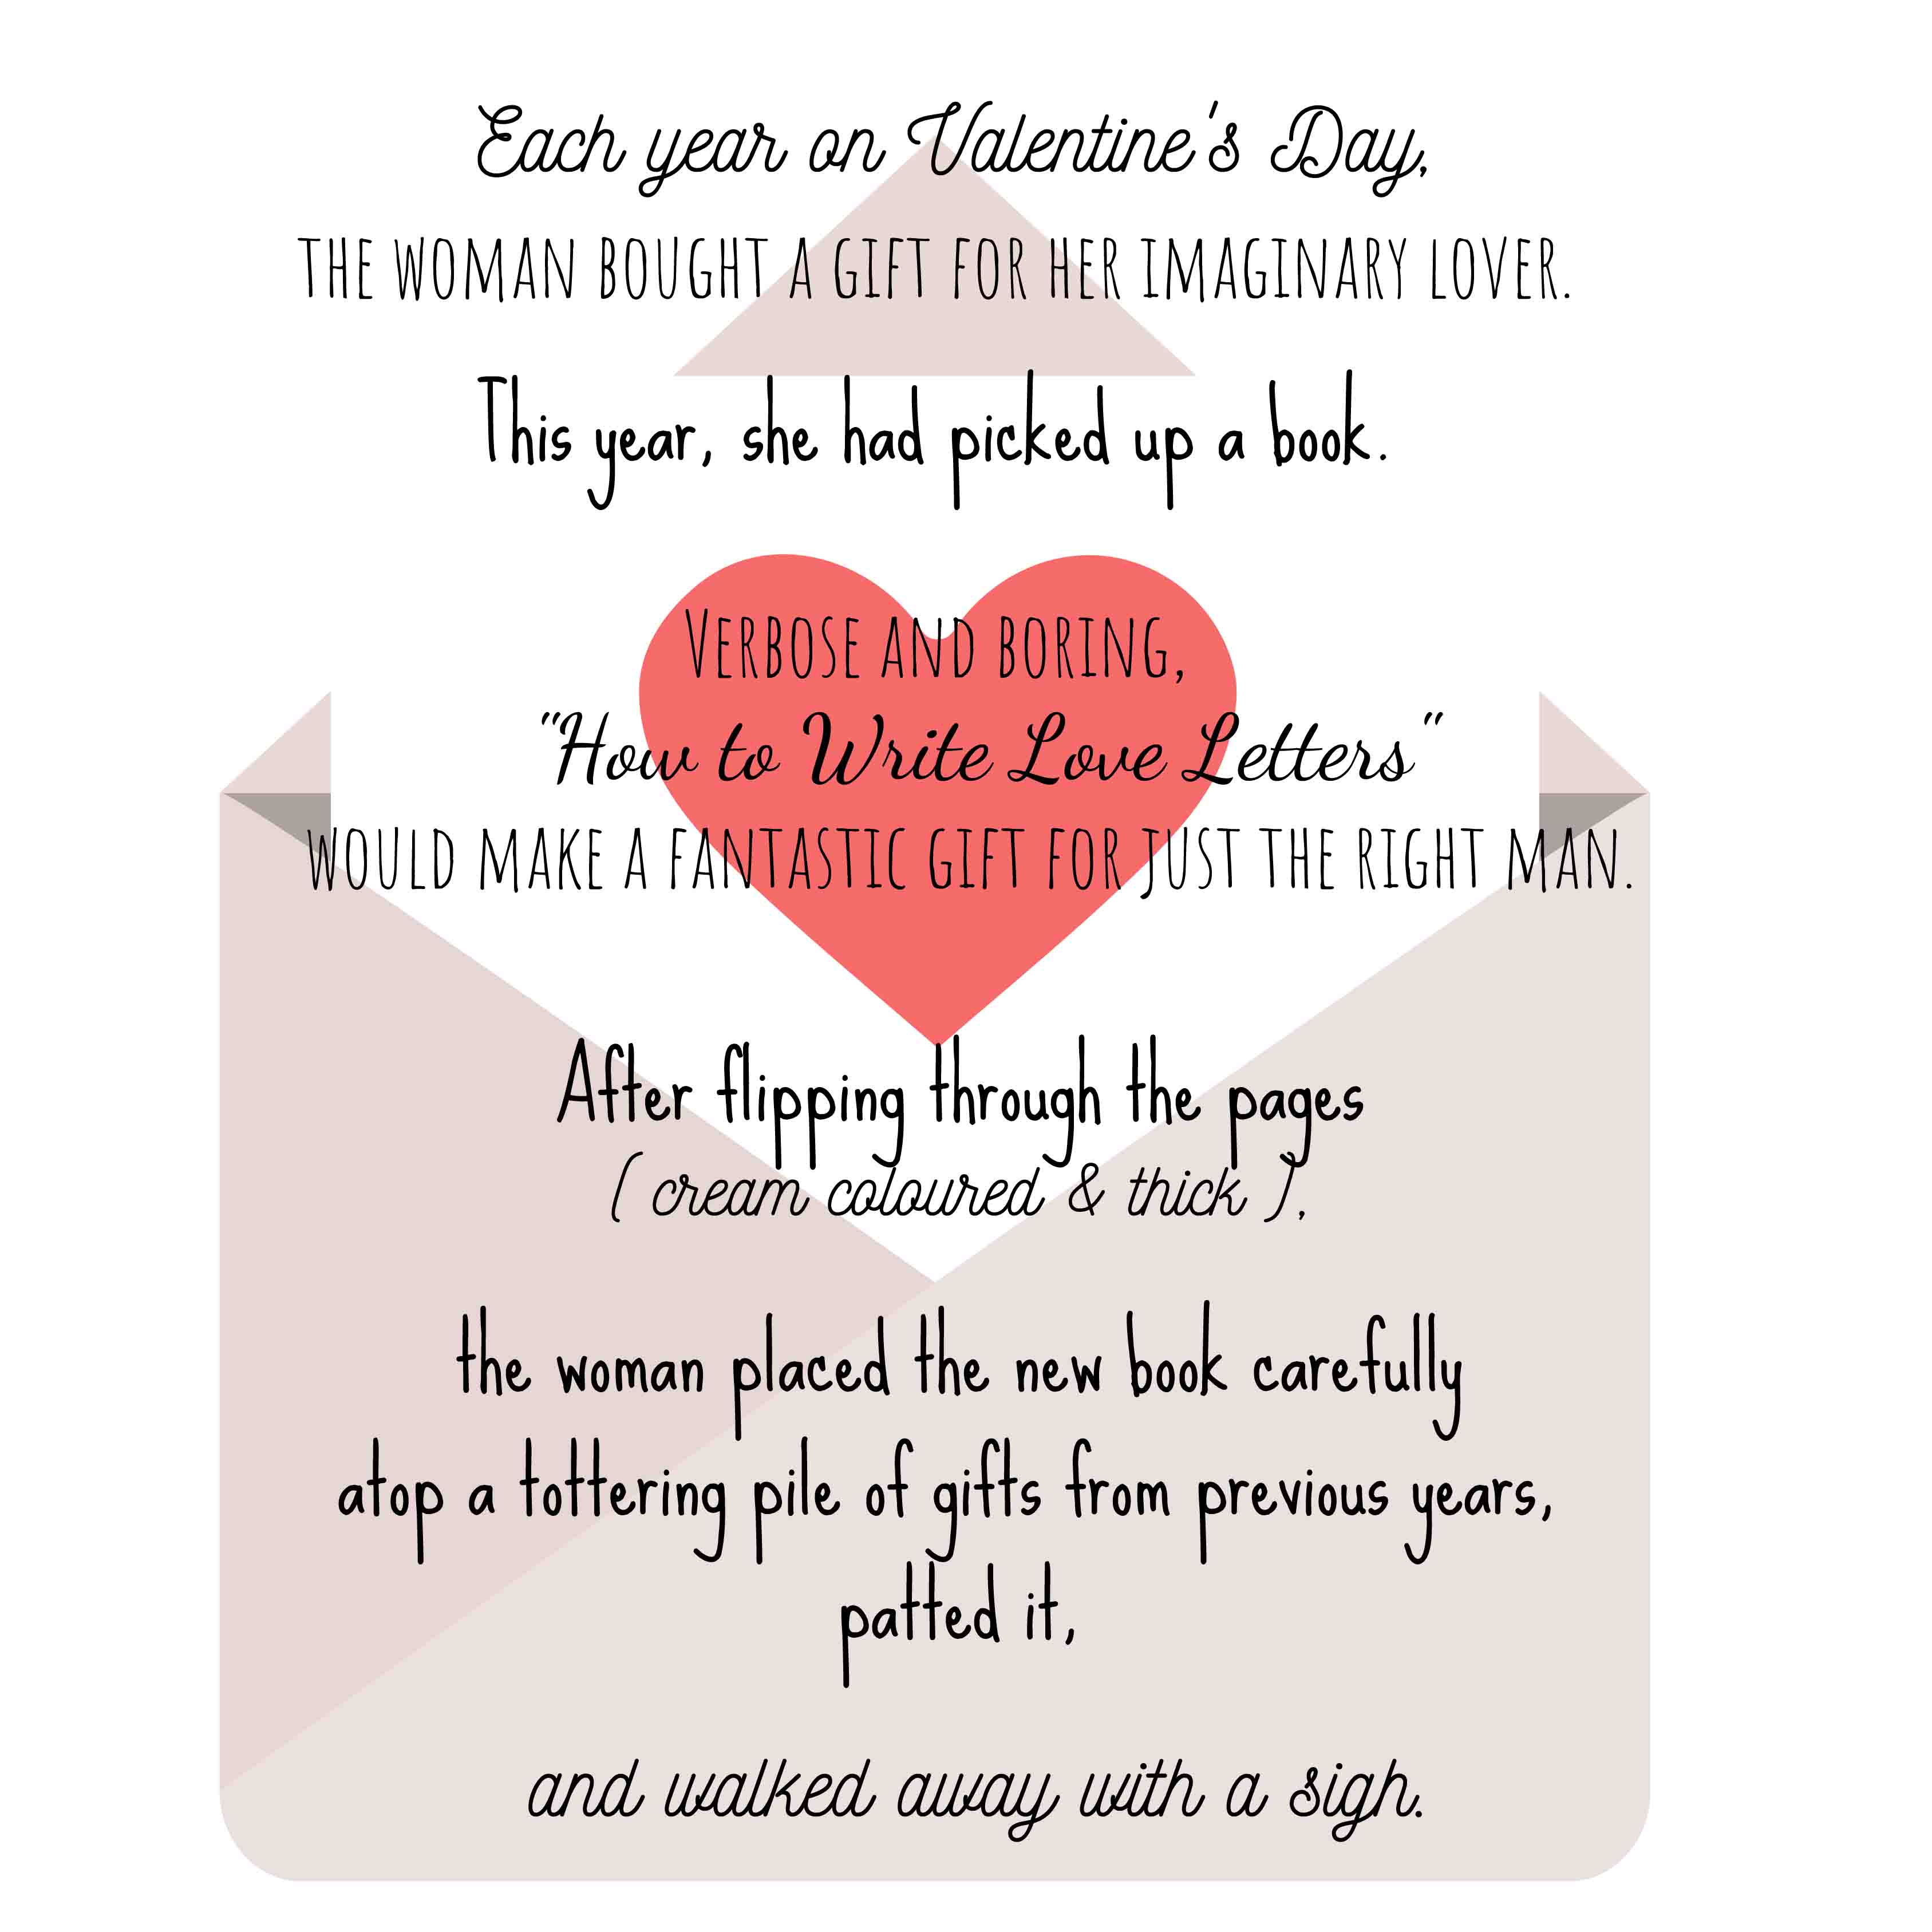 art every day number 454 / a short story / each year on valentine’s day